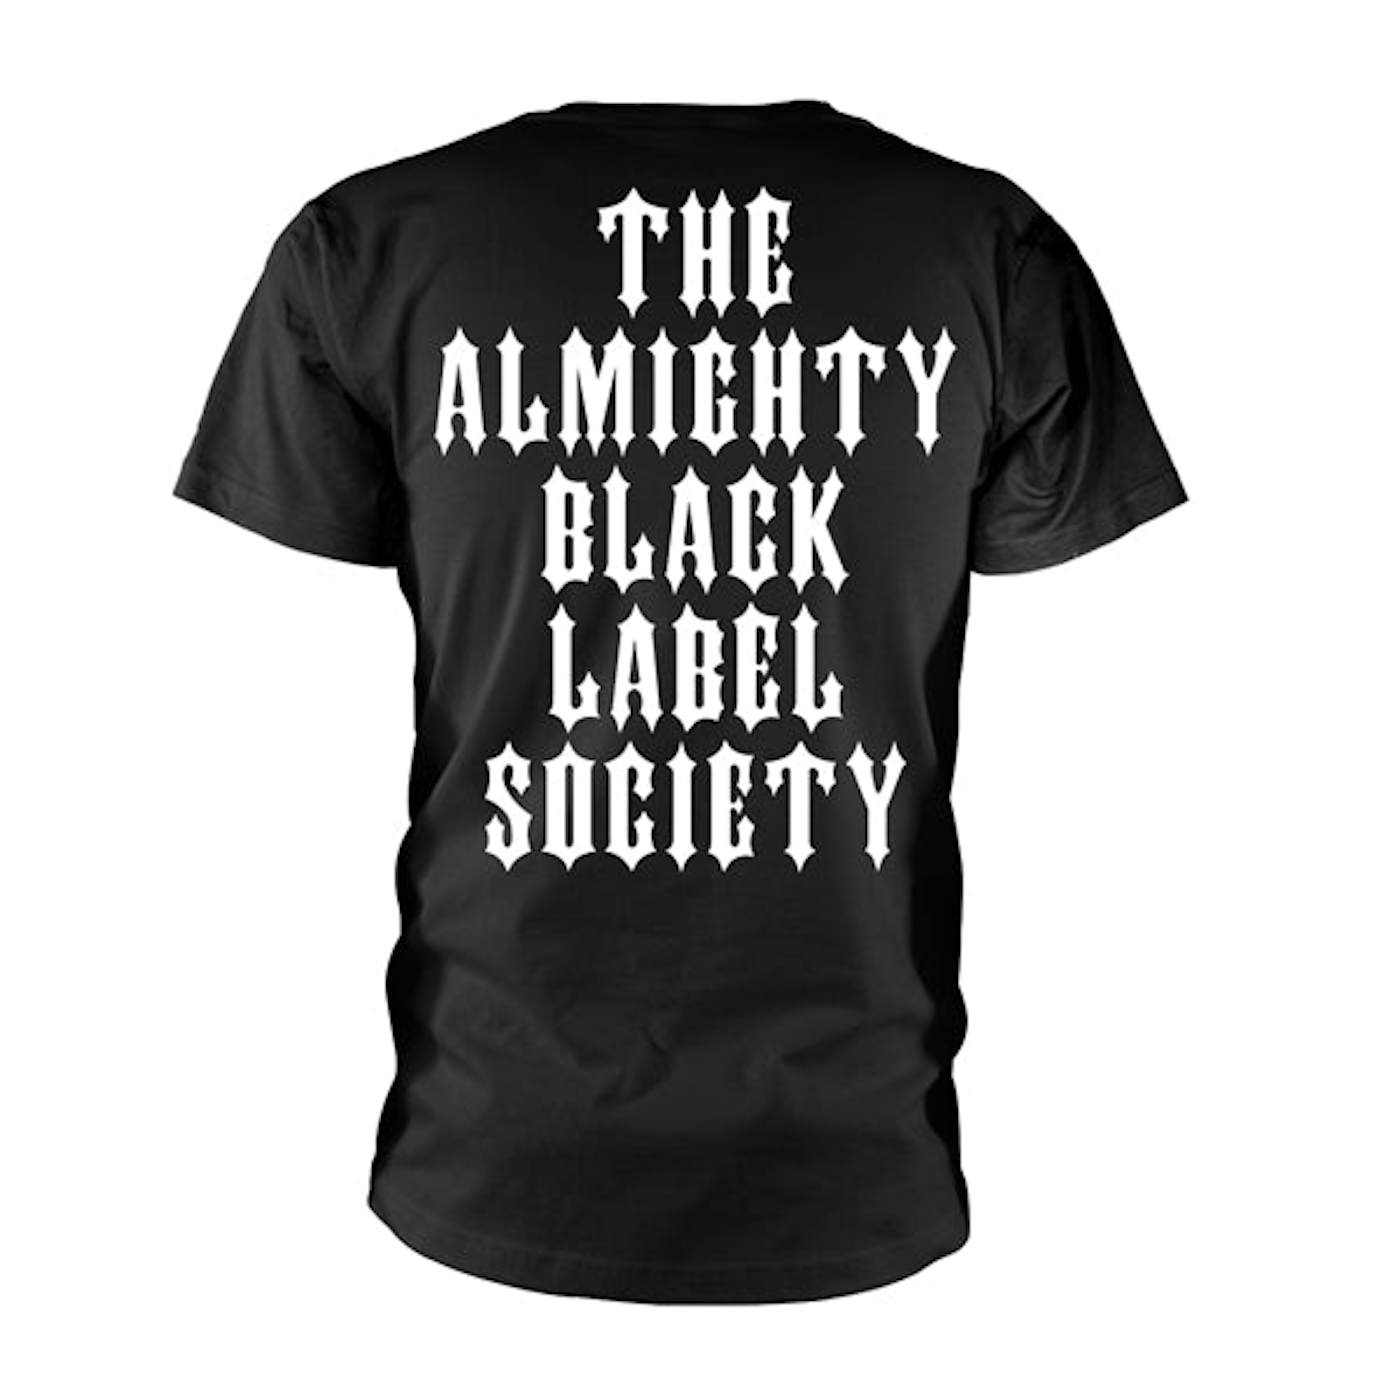 Black Label Society T-Shirt - The Almighty (Black)